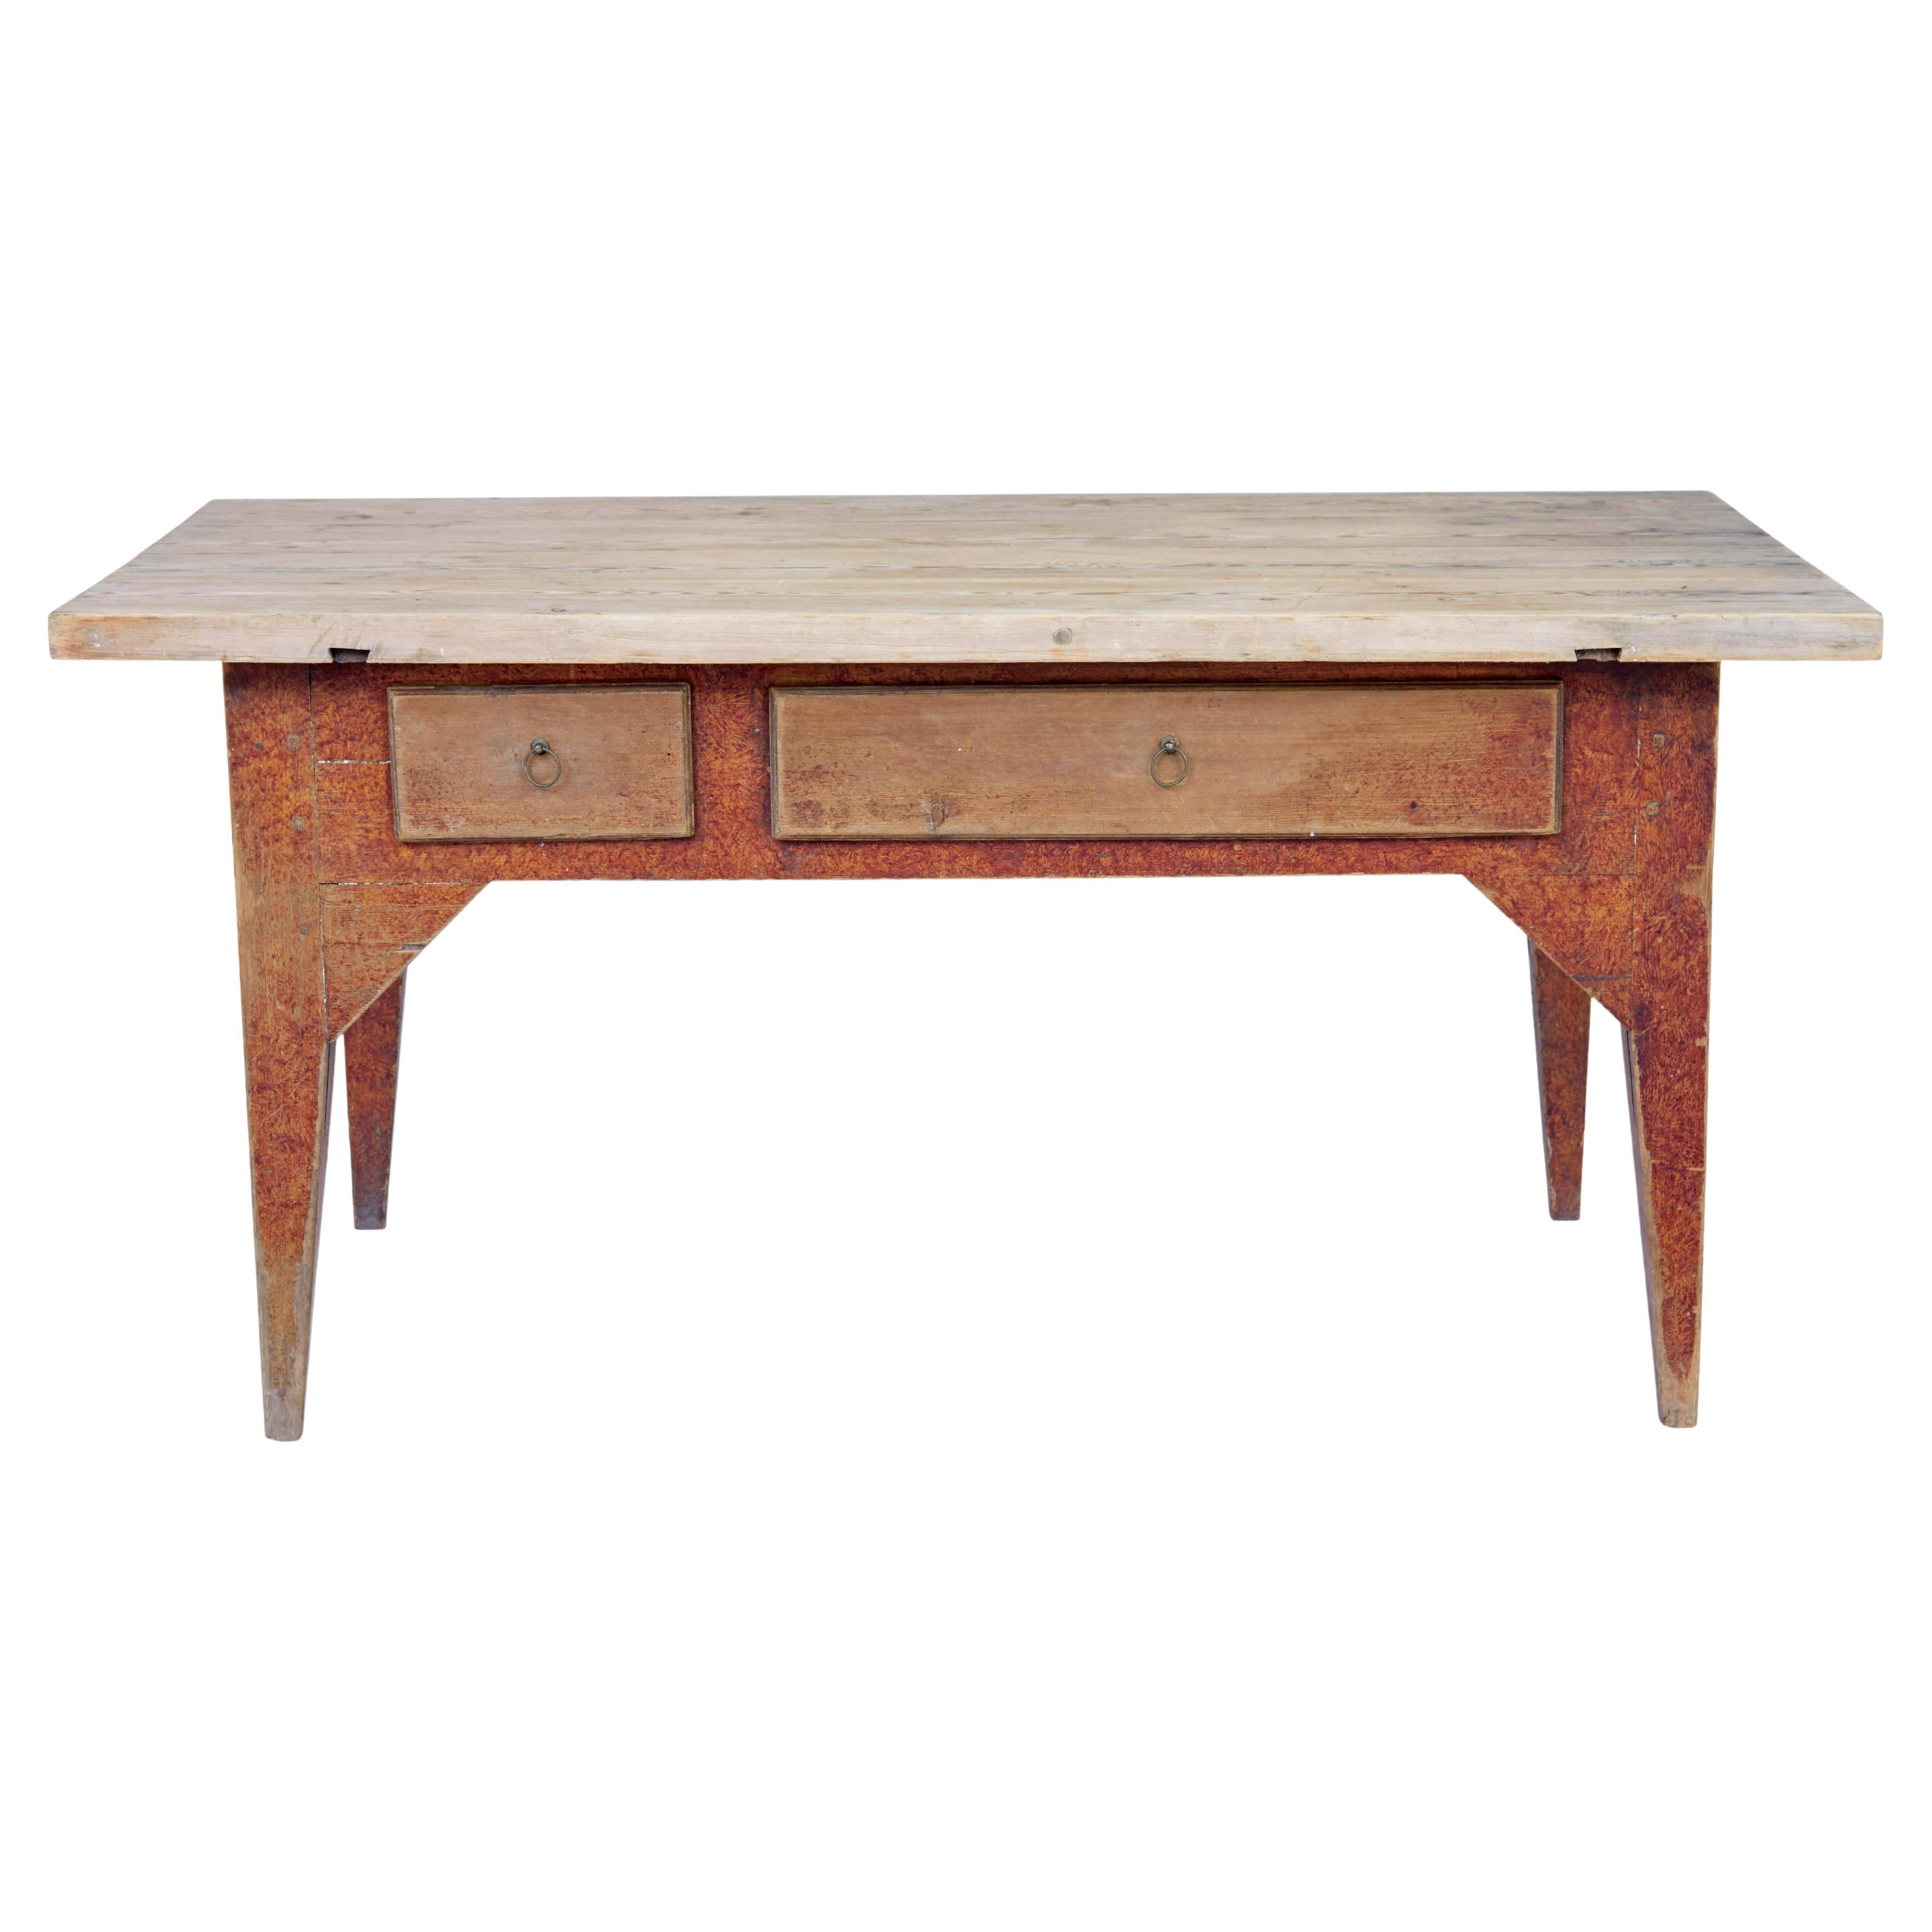 Mid 19th Century rustic painted pine kitchen table